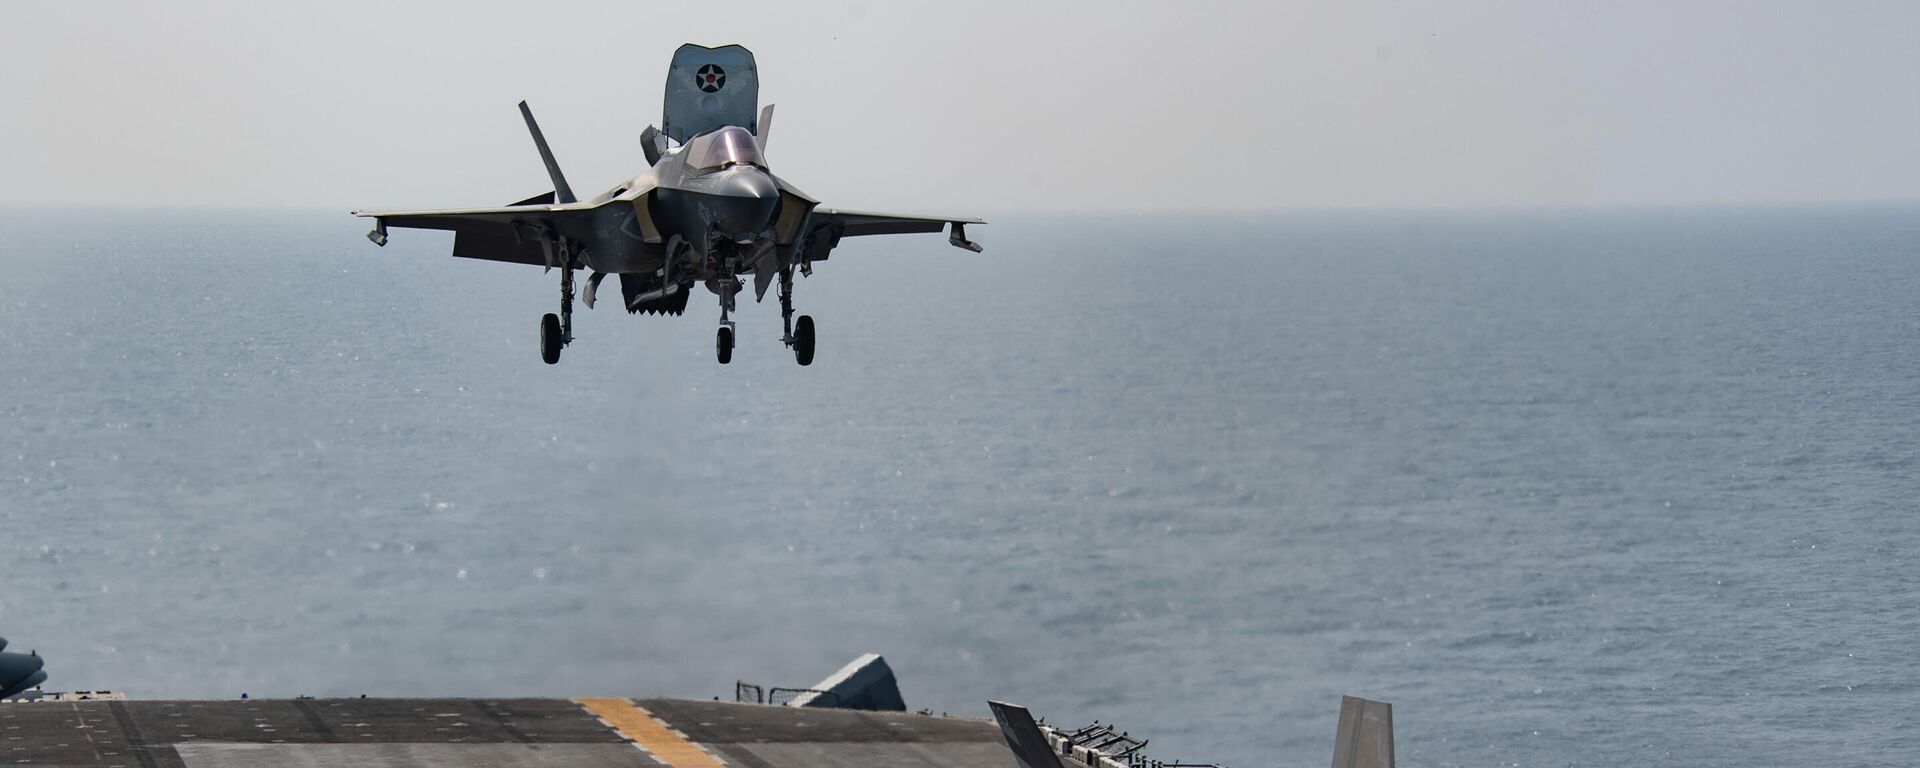 F-35B Lightning II attached to Marine Fighter Attack Squadron (VMFA) 211, deployed with the British Royal Navy aircraft carrier HMS Queen Elizabeth, lands on the flight deck of the amphibious assault ship USS Essex (LHD 2) during an interoperability exercise with Queen Elizabeth, Nov. 8. Essex and the 11th Marine Expeditionary Unit are deployed to the U.S. 5th Fleet area of operations in support of naval operations to ensure maritime stability and security in the Central Region, connecting the Mediterranean and the Pacific through the western Indian Ocean and three strategic choke points. - Sputnik International, 1920, 07.02.2022